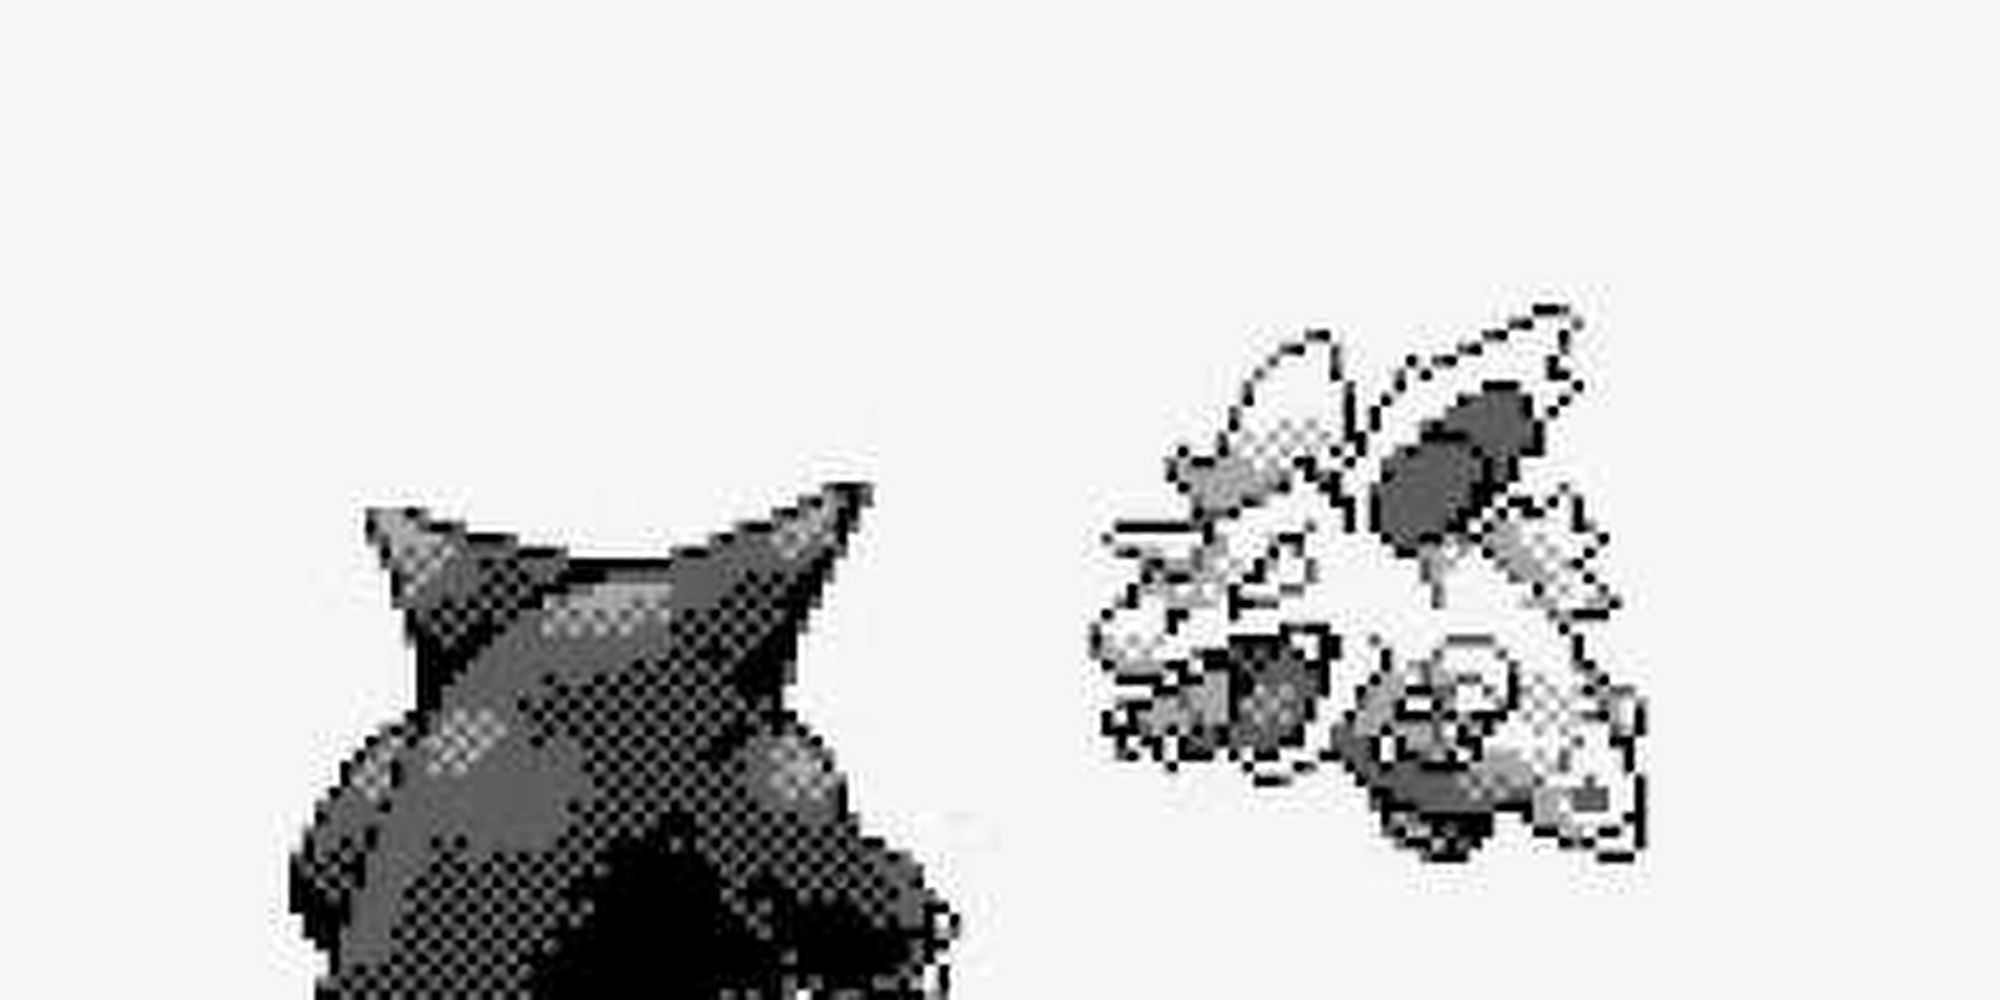 Nidorino attacking Gengar on the title screen of Pokemon Red & Blue.